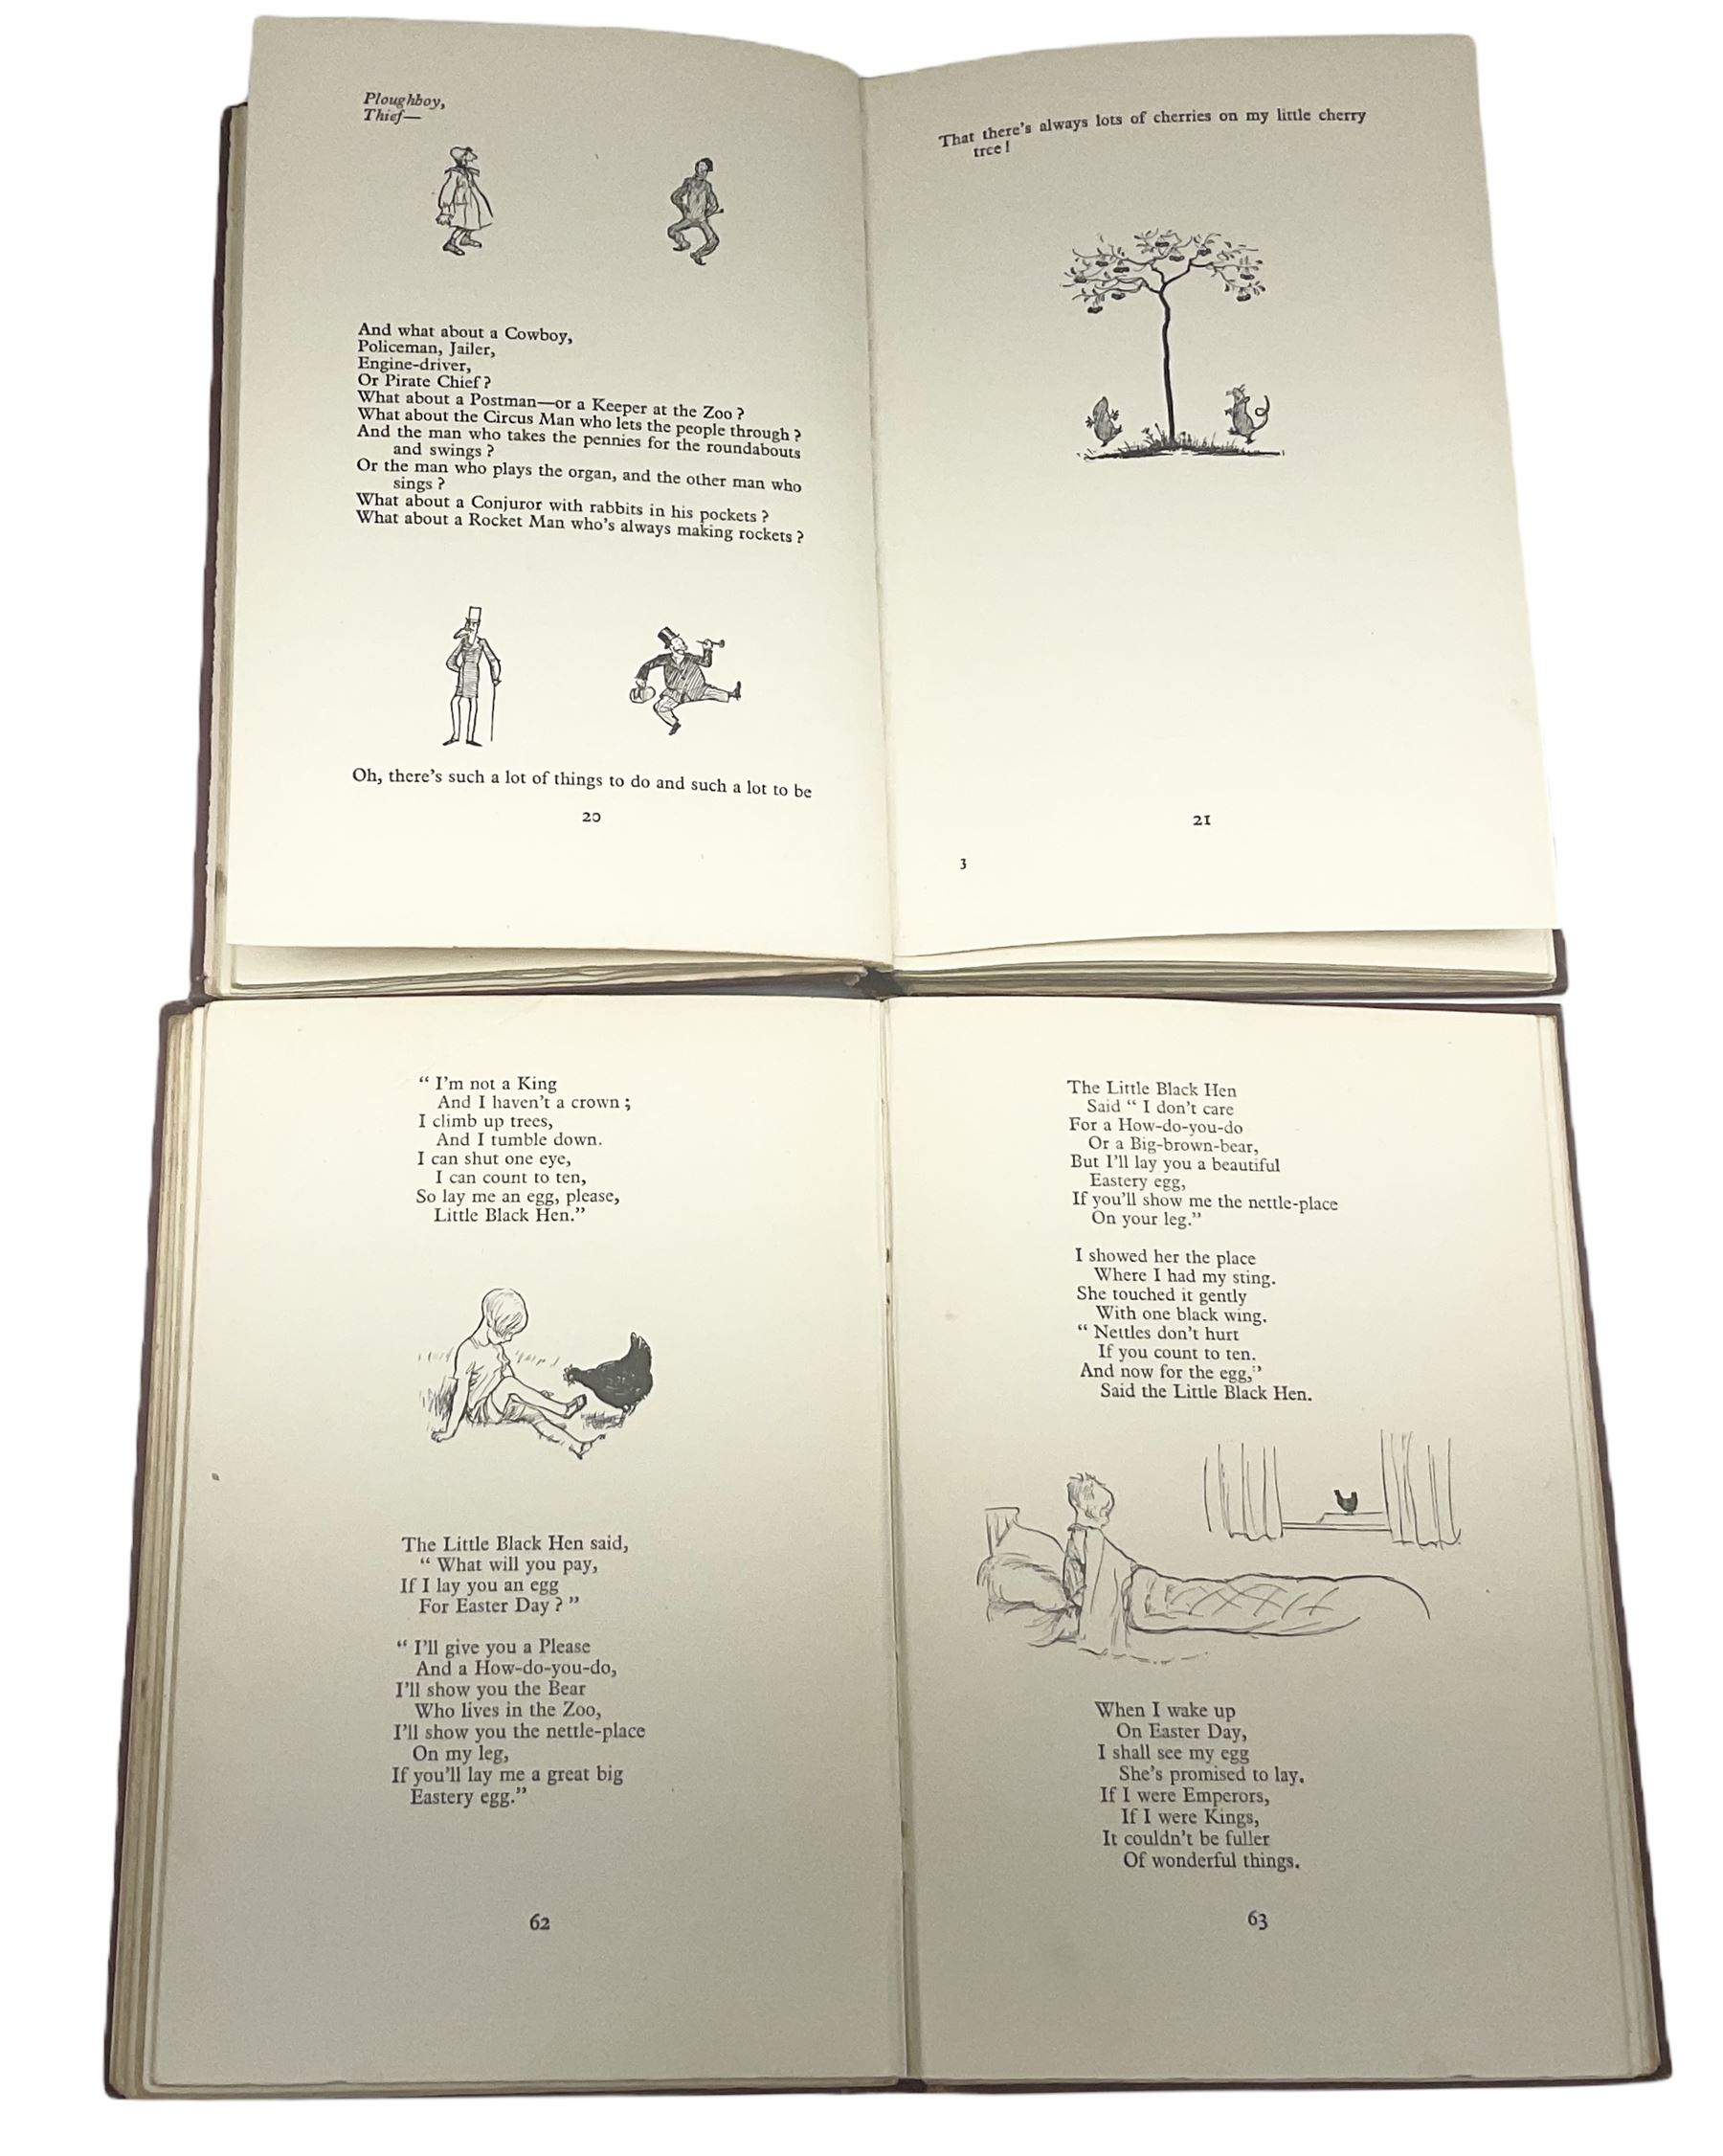 Five A.A. Milne Winnie The Pooh books illustrated by E.H. Shepard - The House at Pooh Corner. 1928. - Image 10 of 13